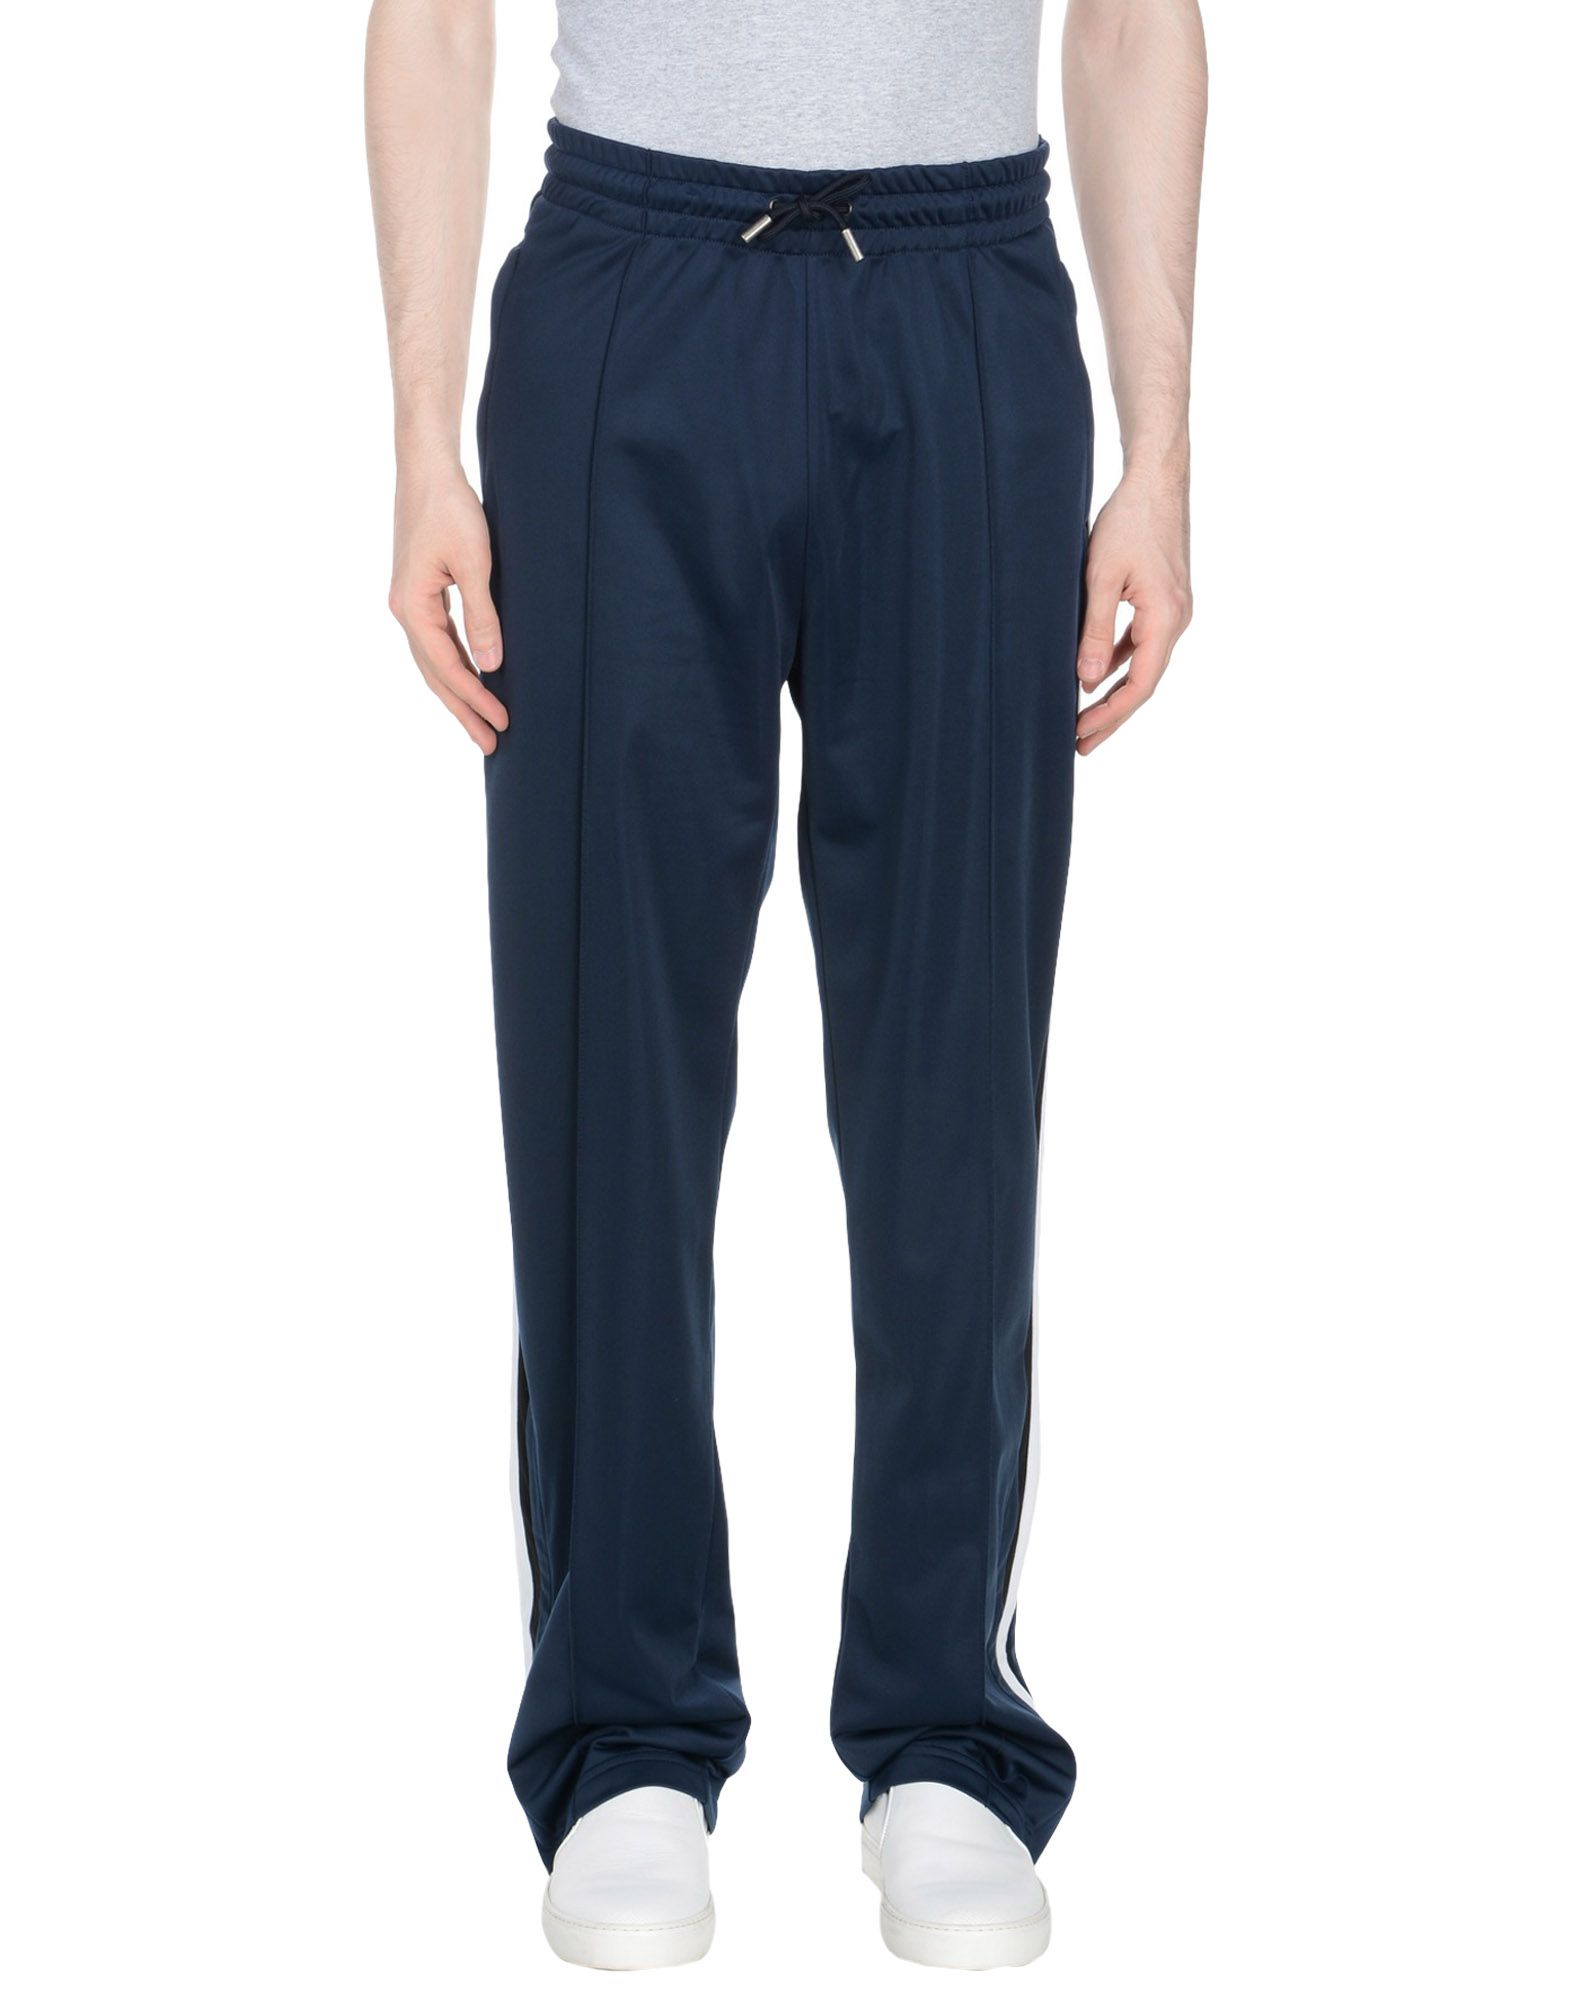 DIESEL BLACK GOLD Casual trousers,13171855UH 1